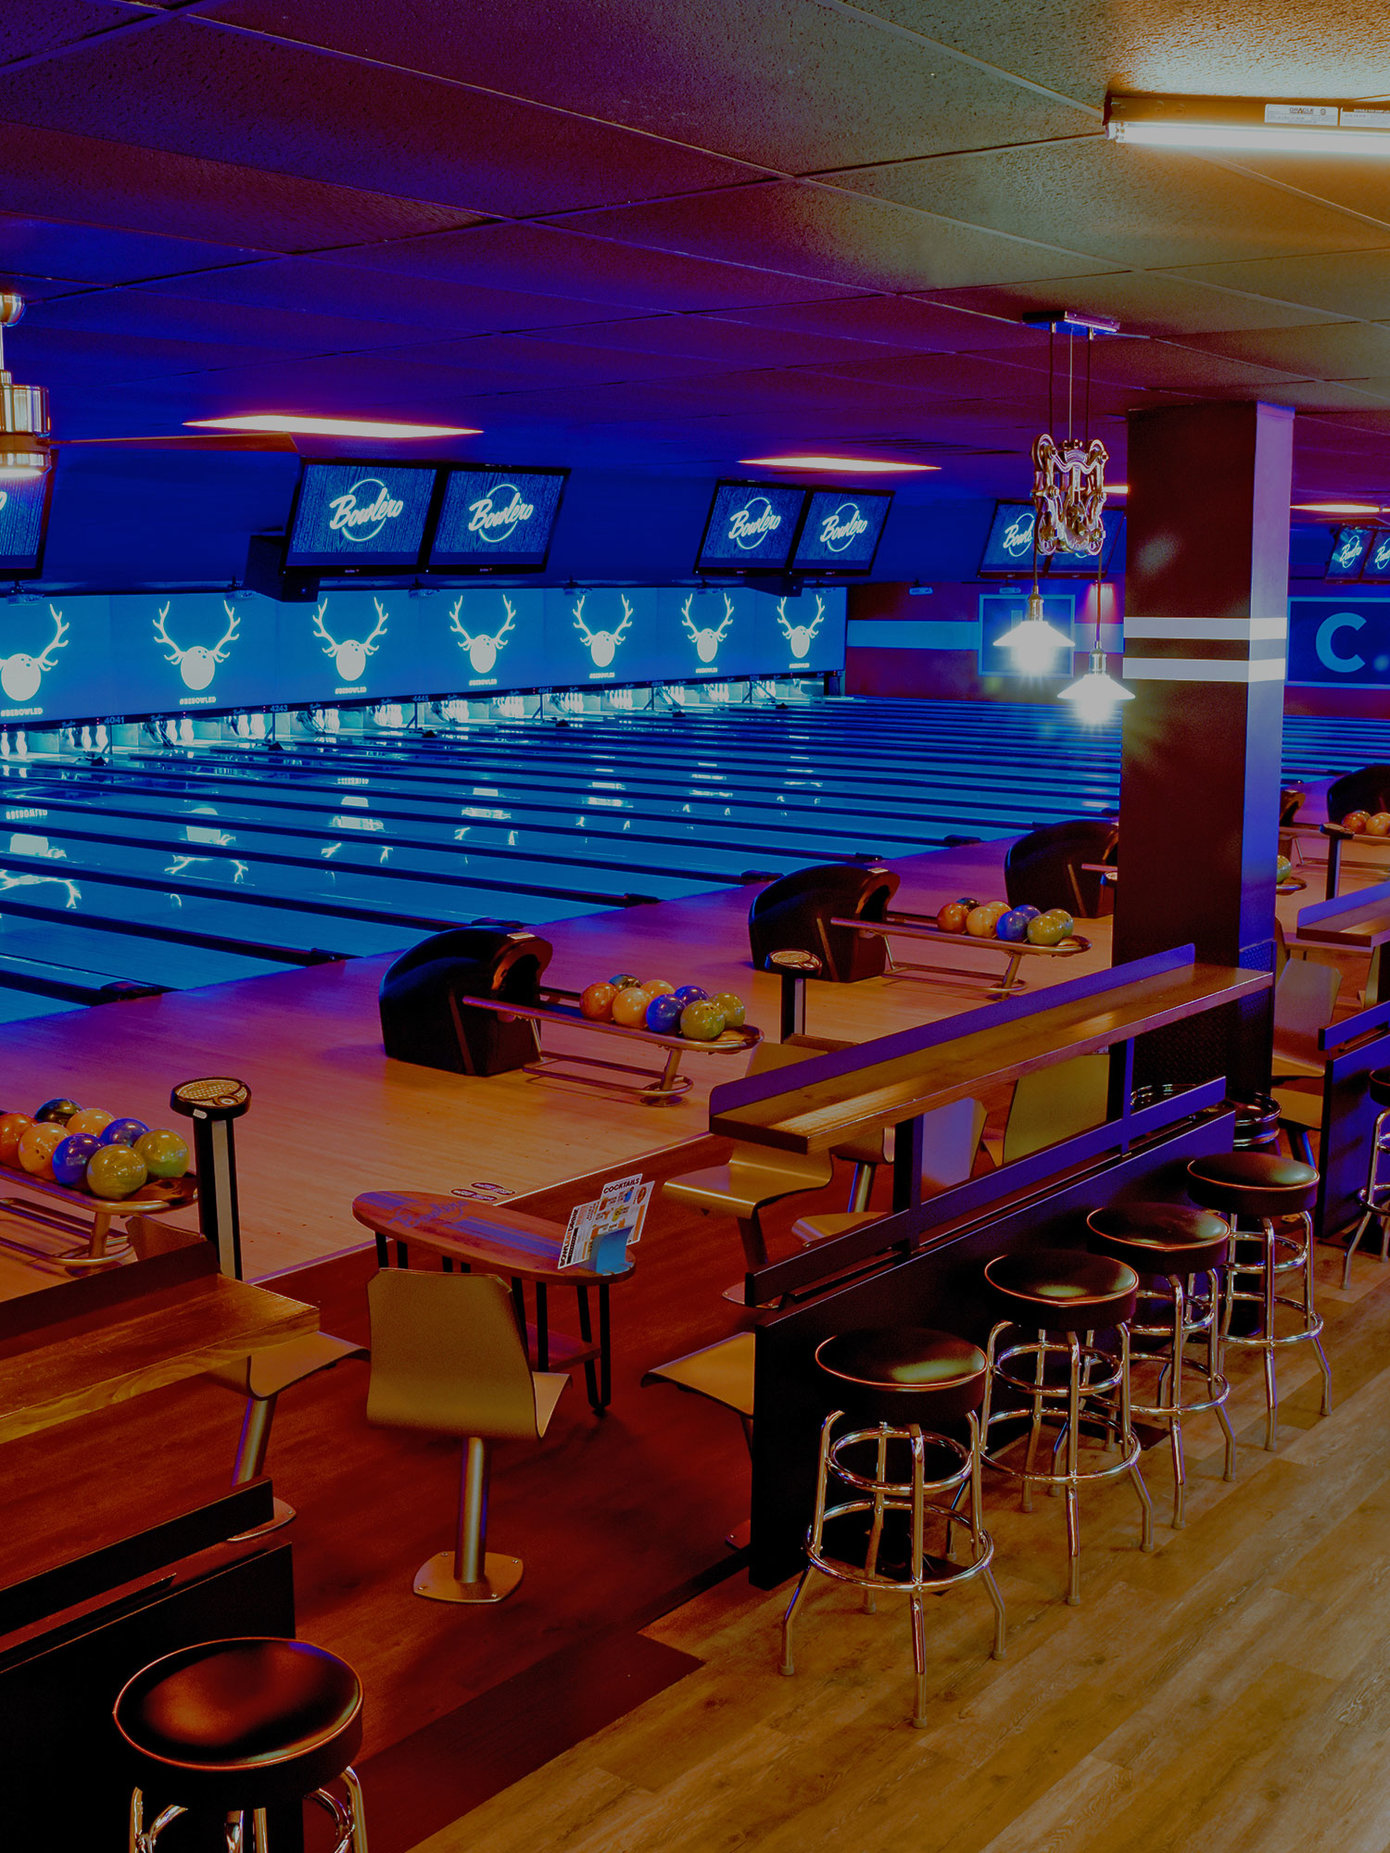 Her Shot Of Lanes And Bar Seats